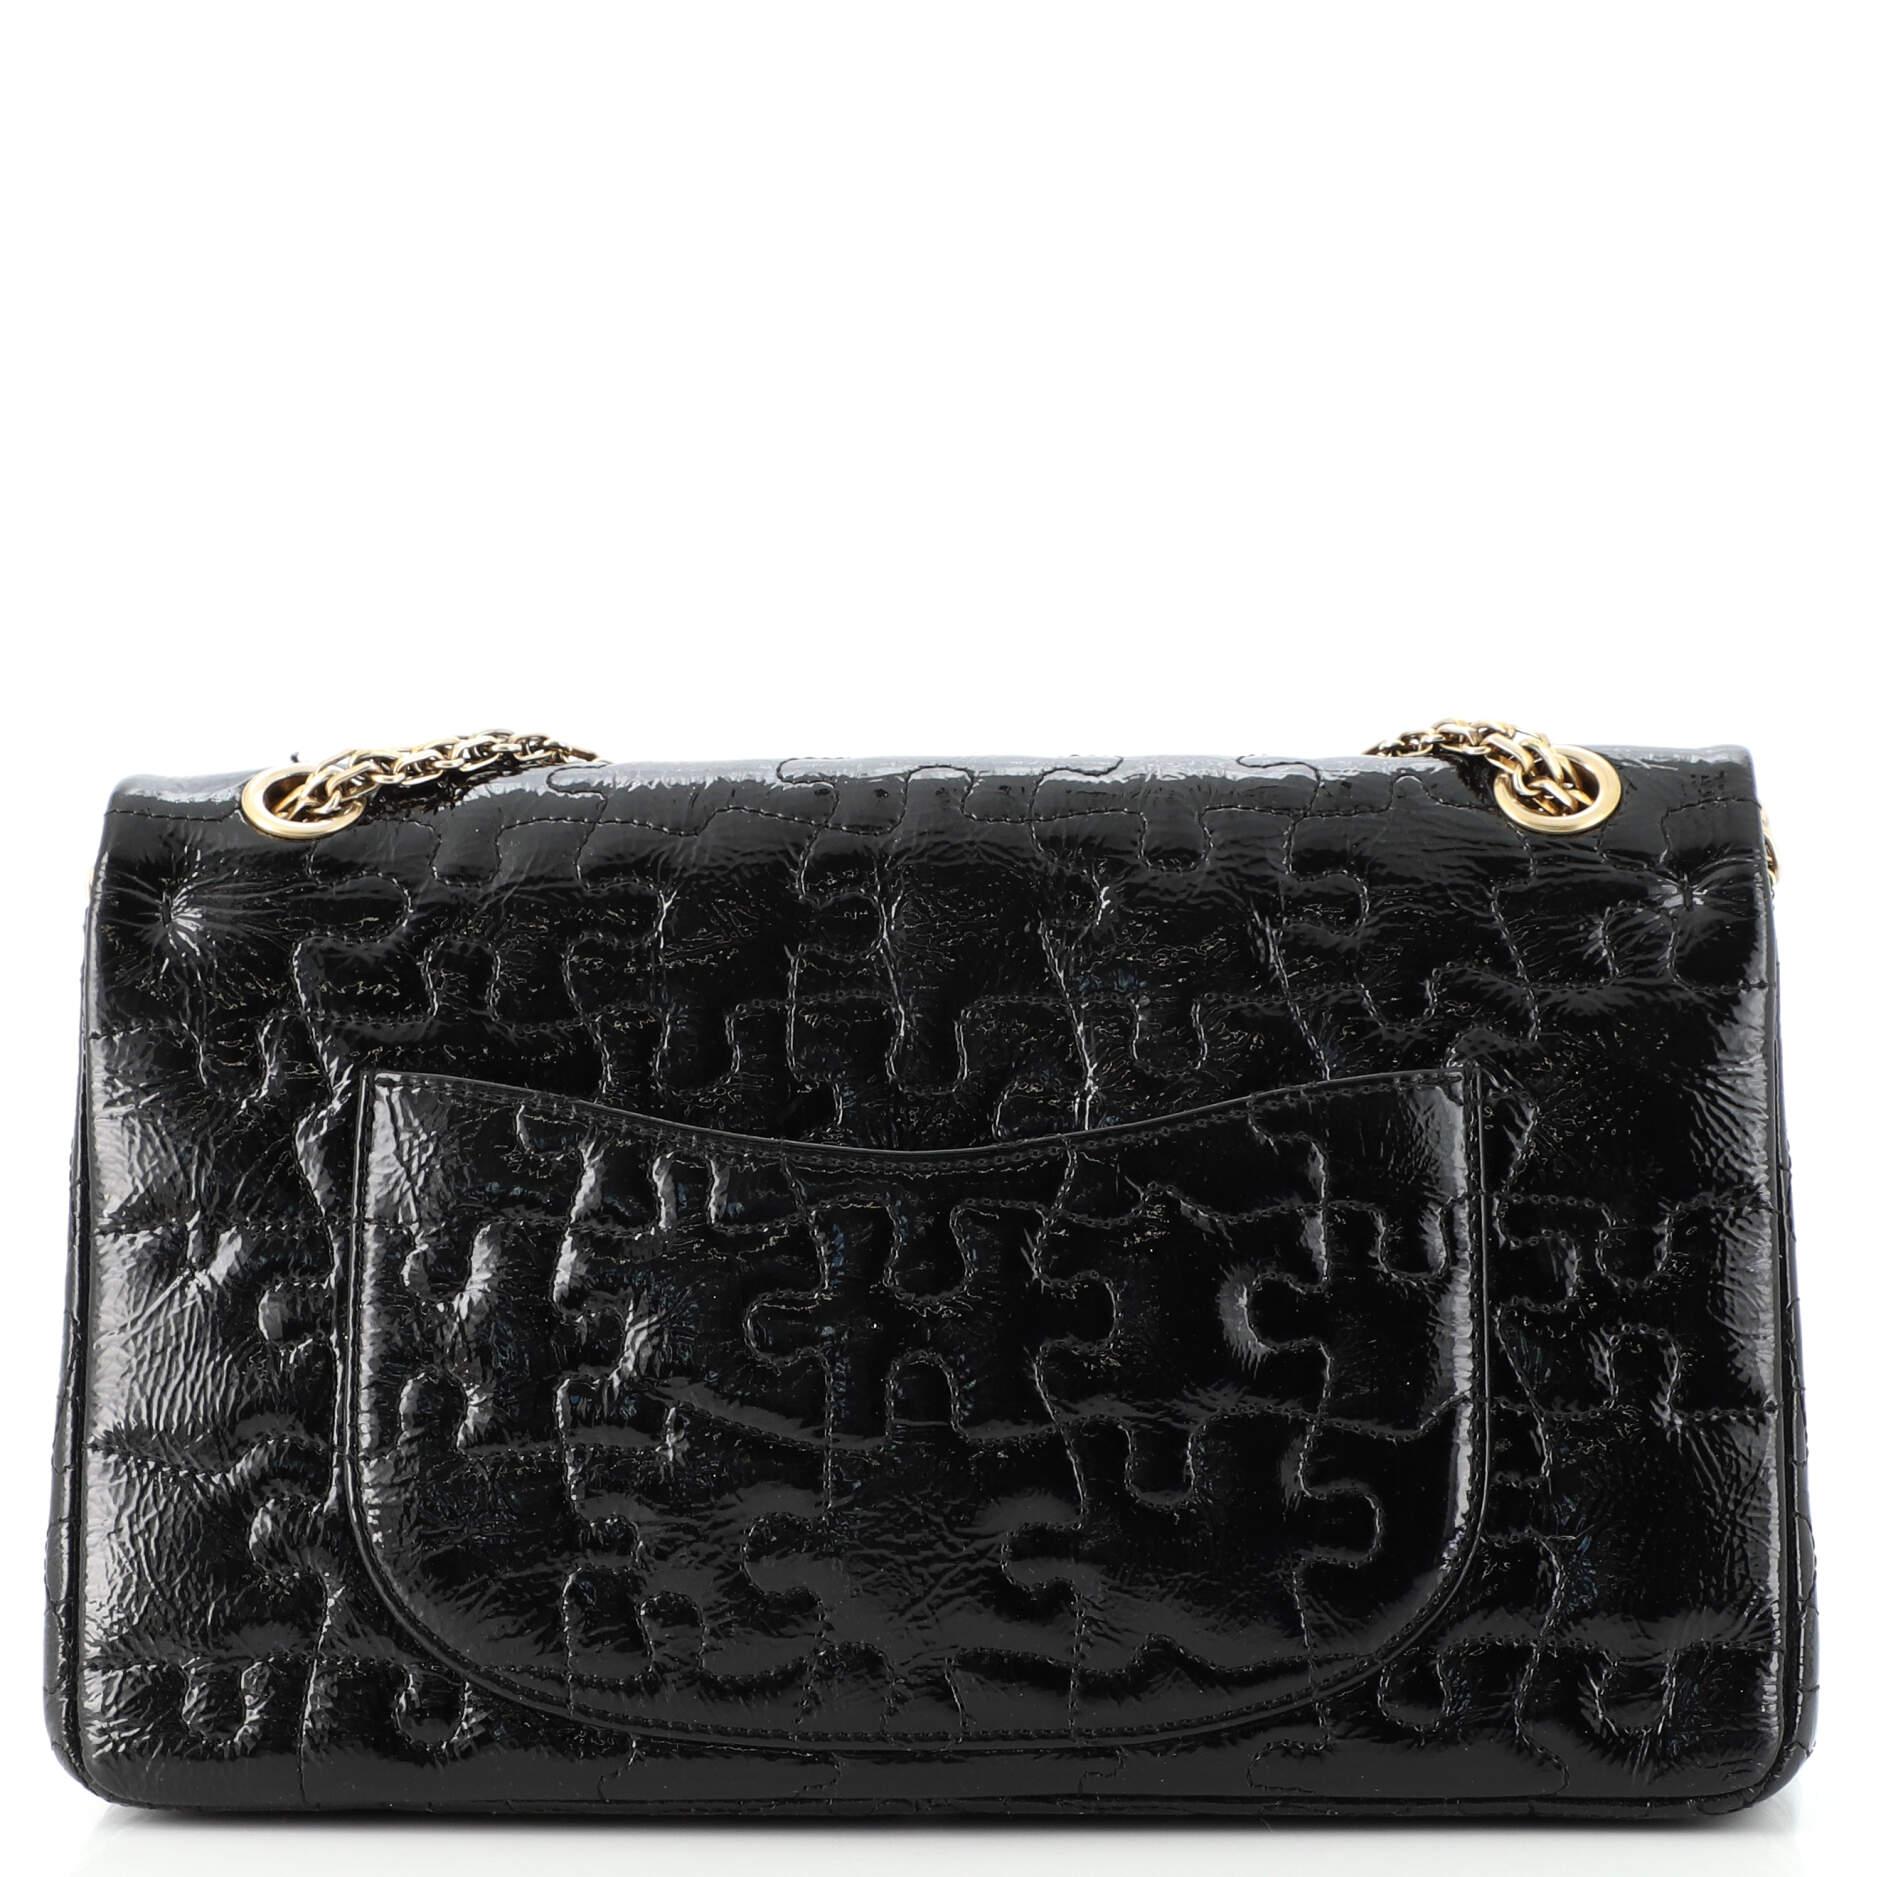 Women's or Men's Chanel Puzzle Reissue 2.55 Flap Bag Quilted Patent 226